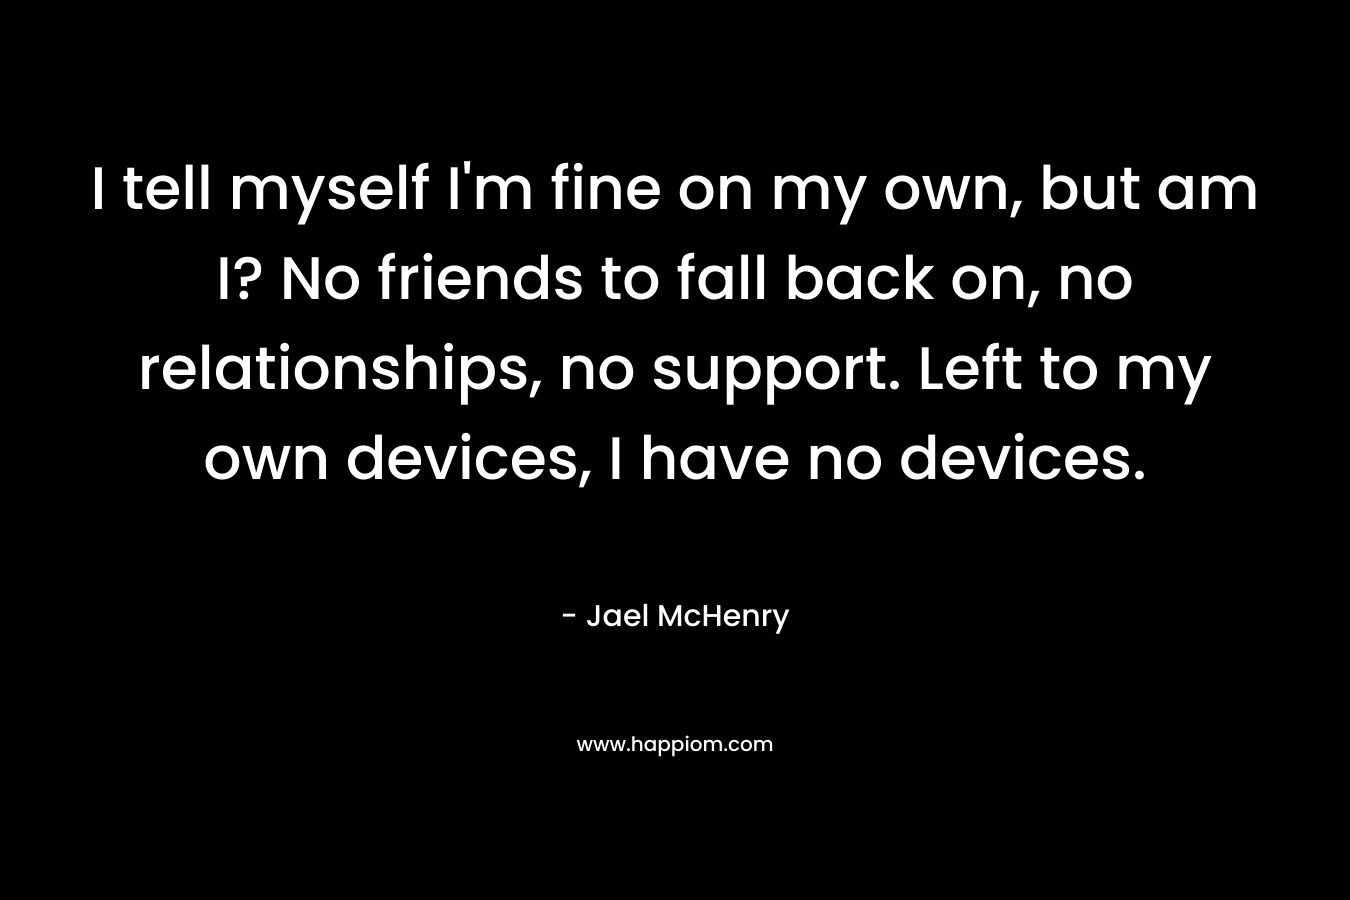 I tell myself I’m fine on my own, but am I? No friends to fall back on, no relationships, no support. Left to my own devices, I have no devices. – Jael McHenry